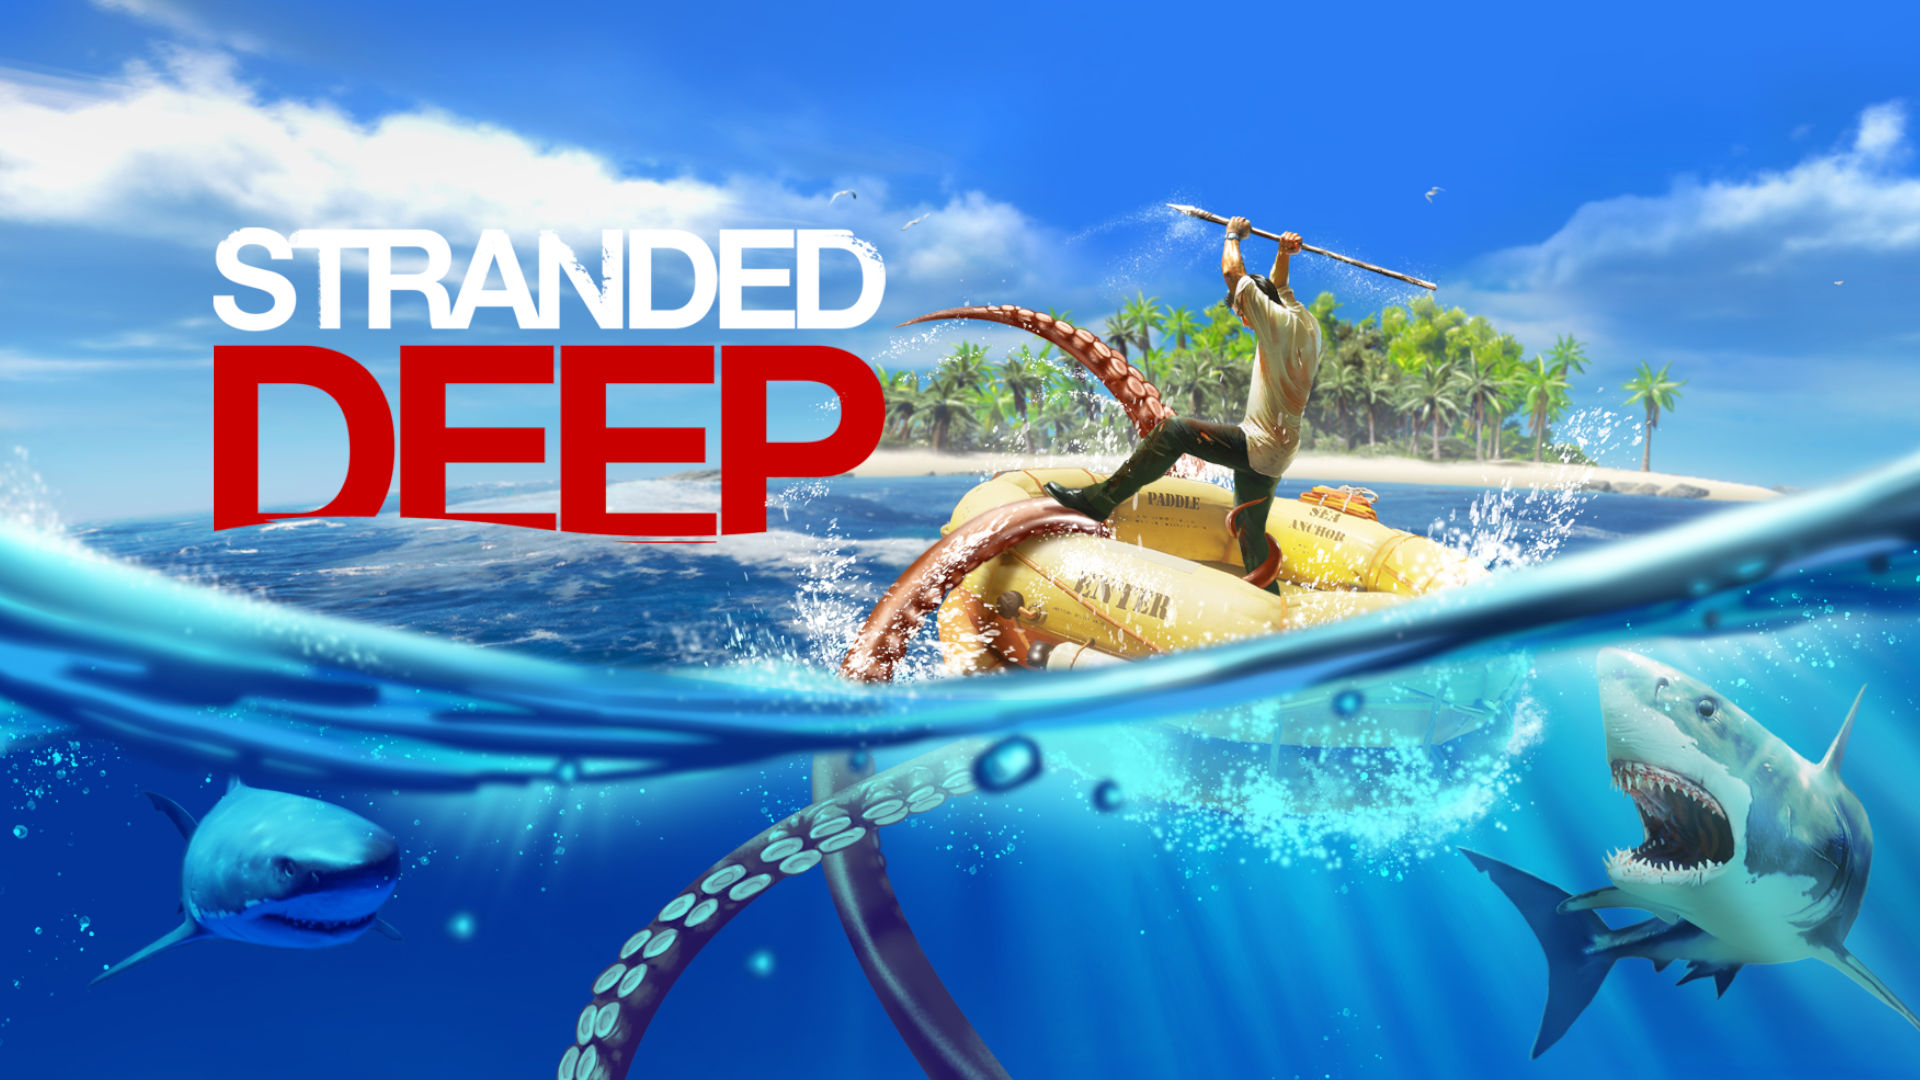 Fishing games - the Stranded Deep logo next to a man fishing in the ocean